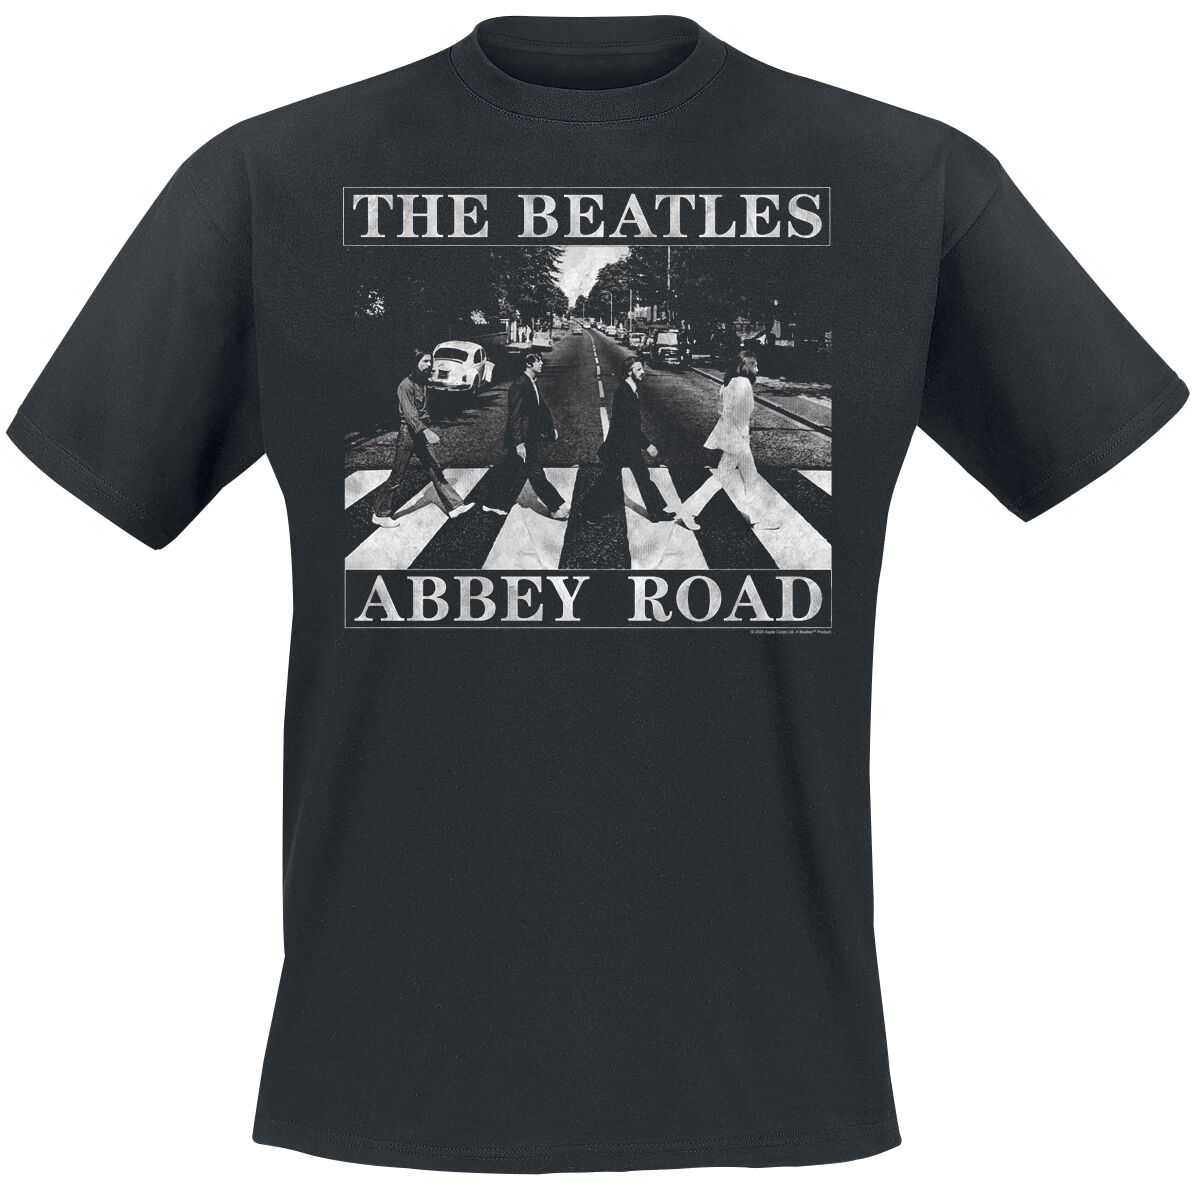 The Beatles Abbey Road Distressed T-Shirt schwarz in L